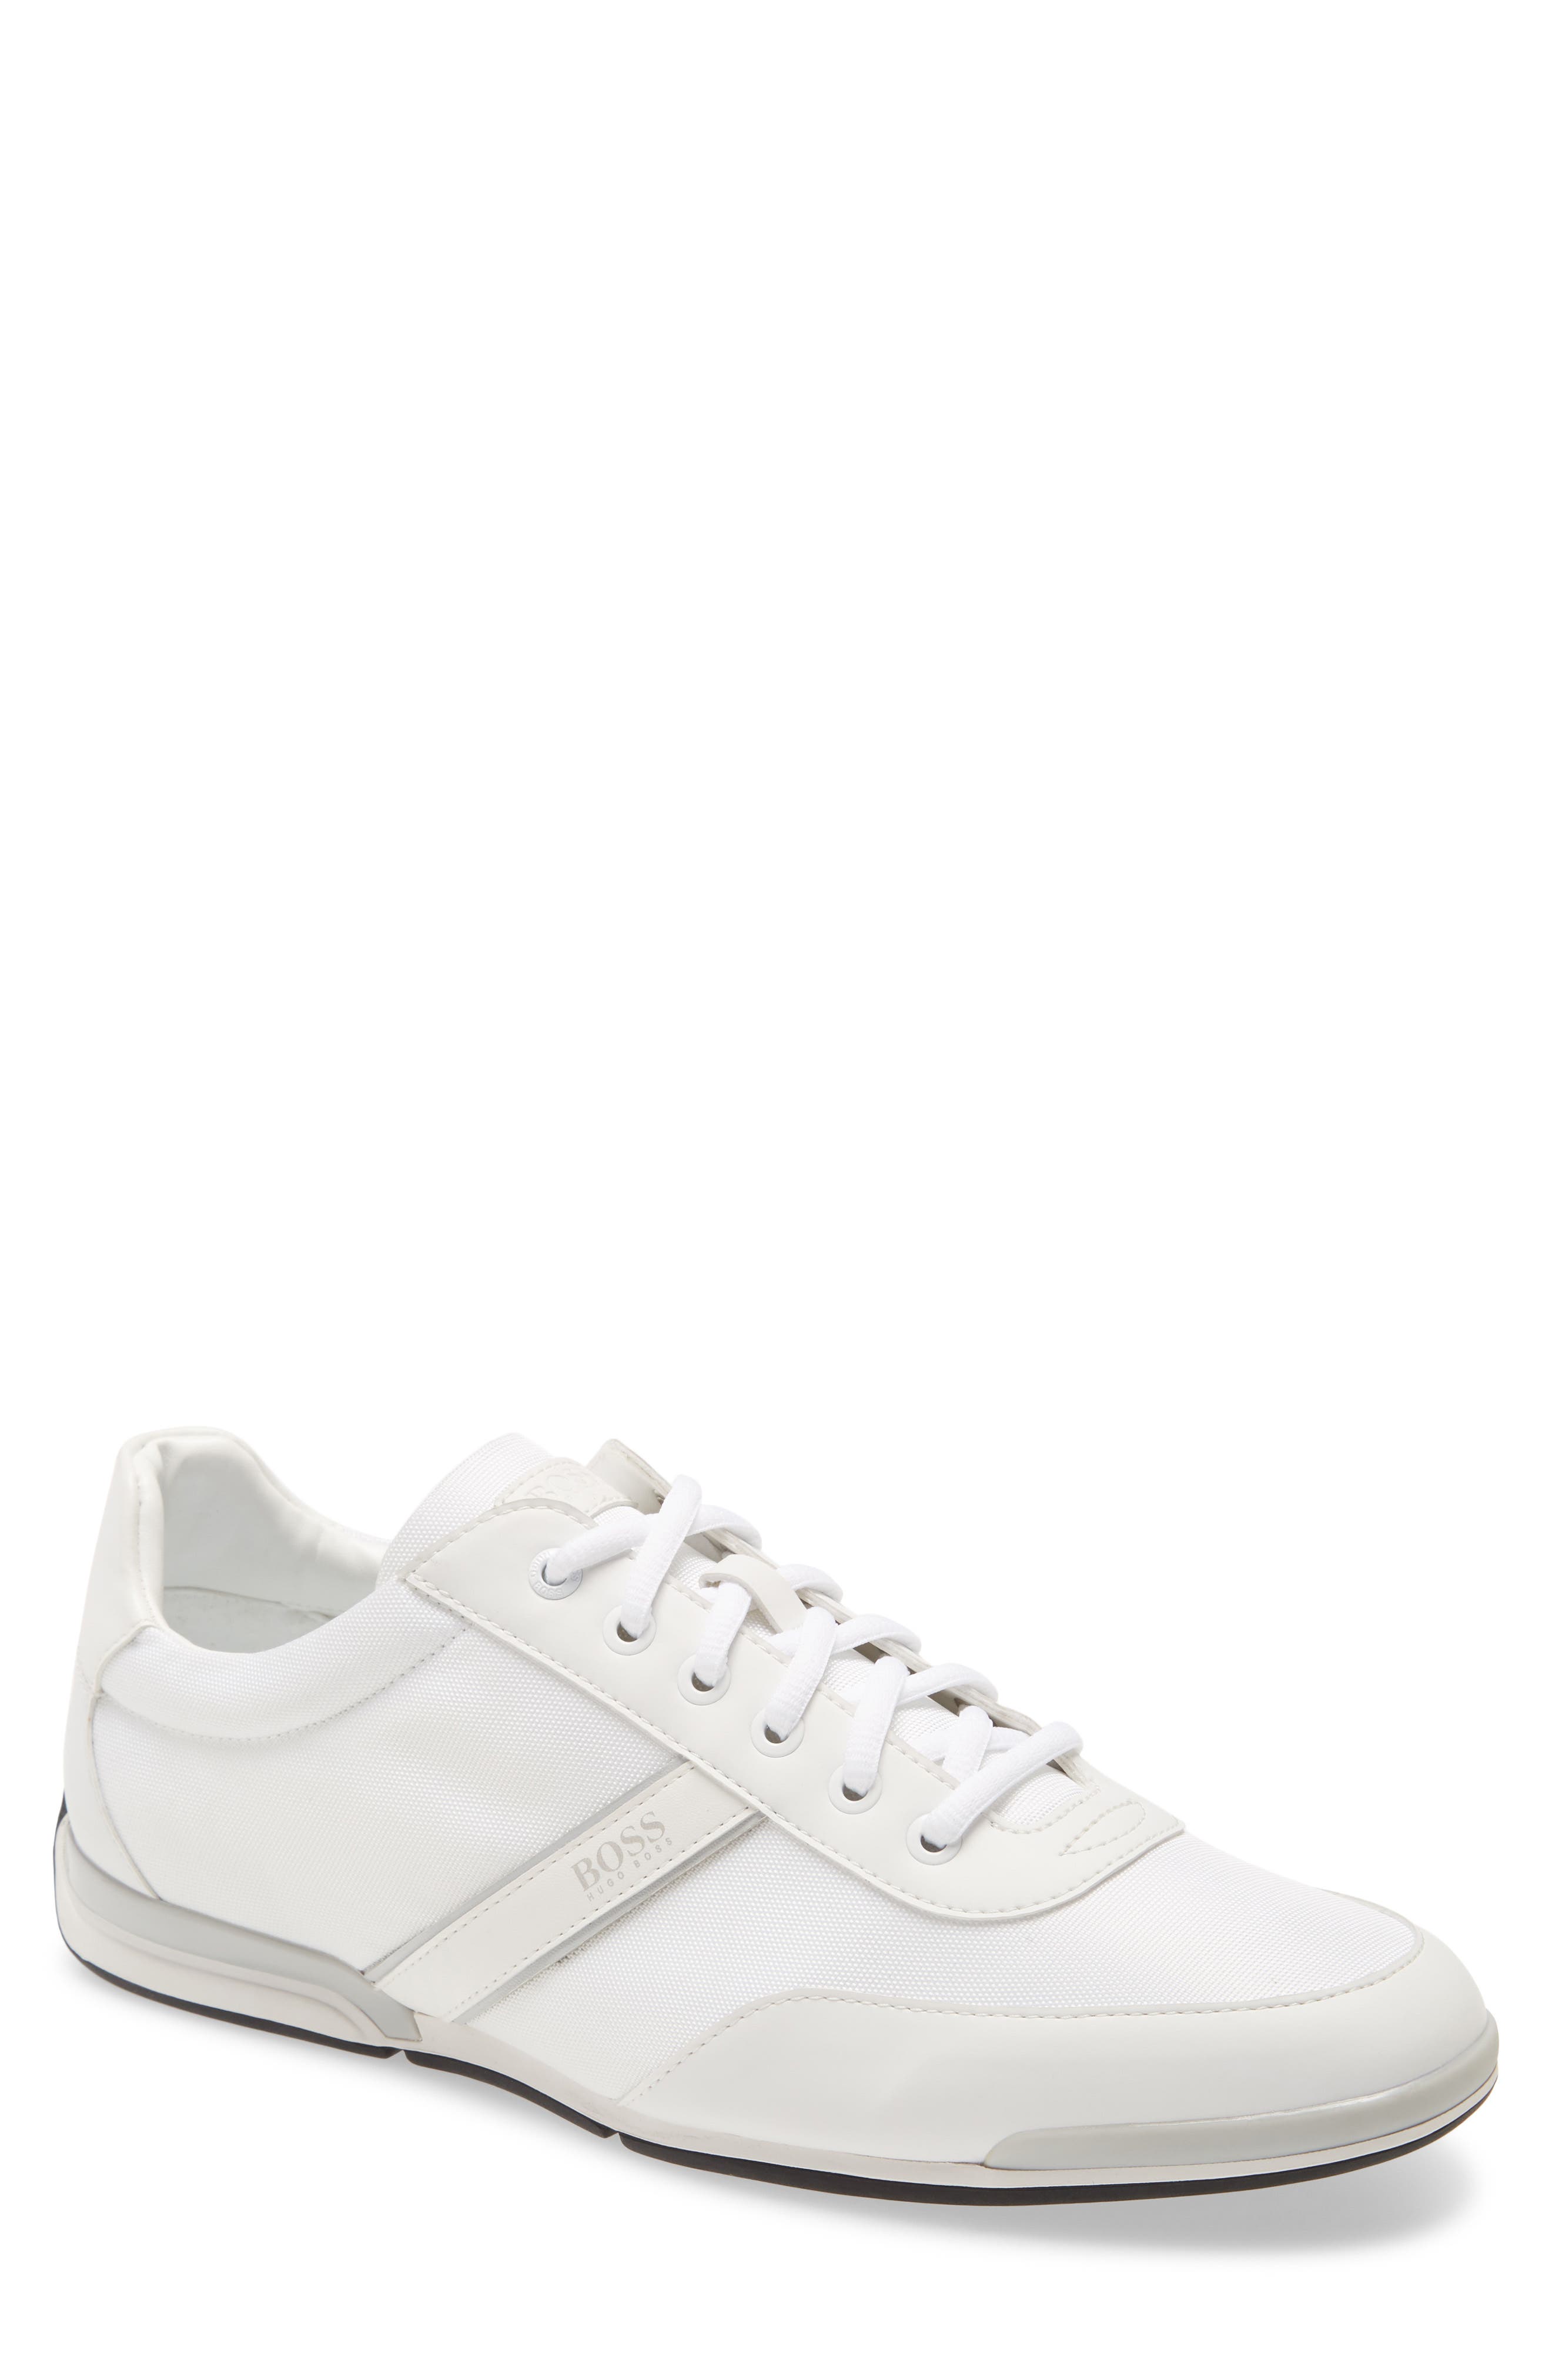 Men's Casual All-White Sneakers | Nordstrom